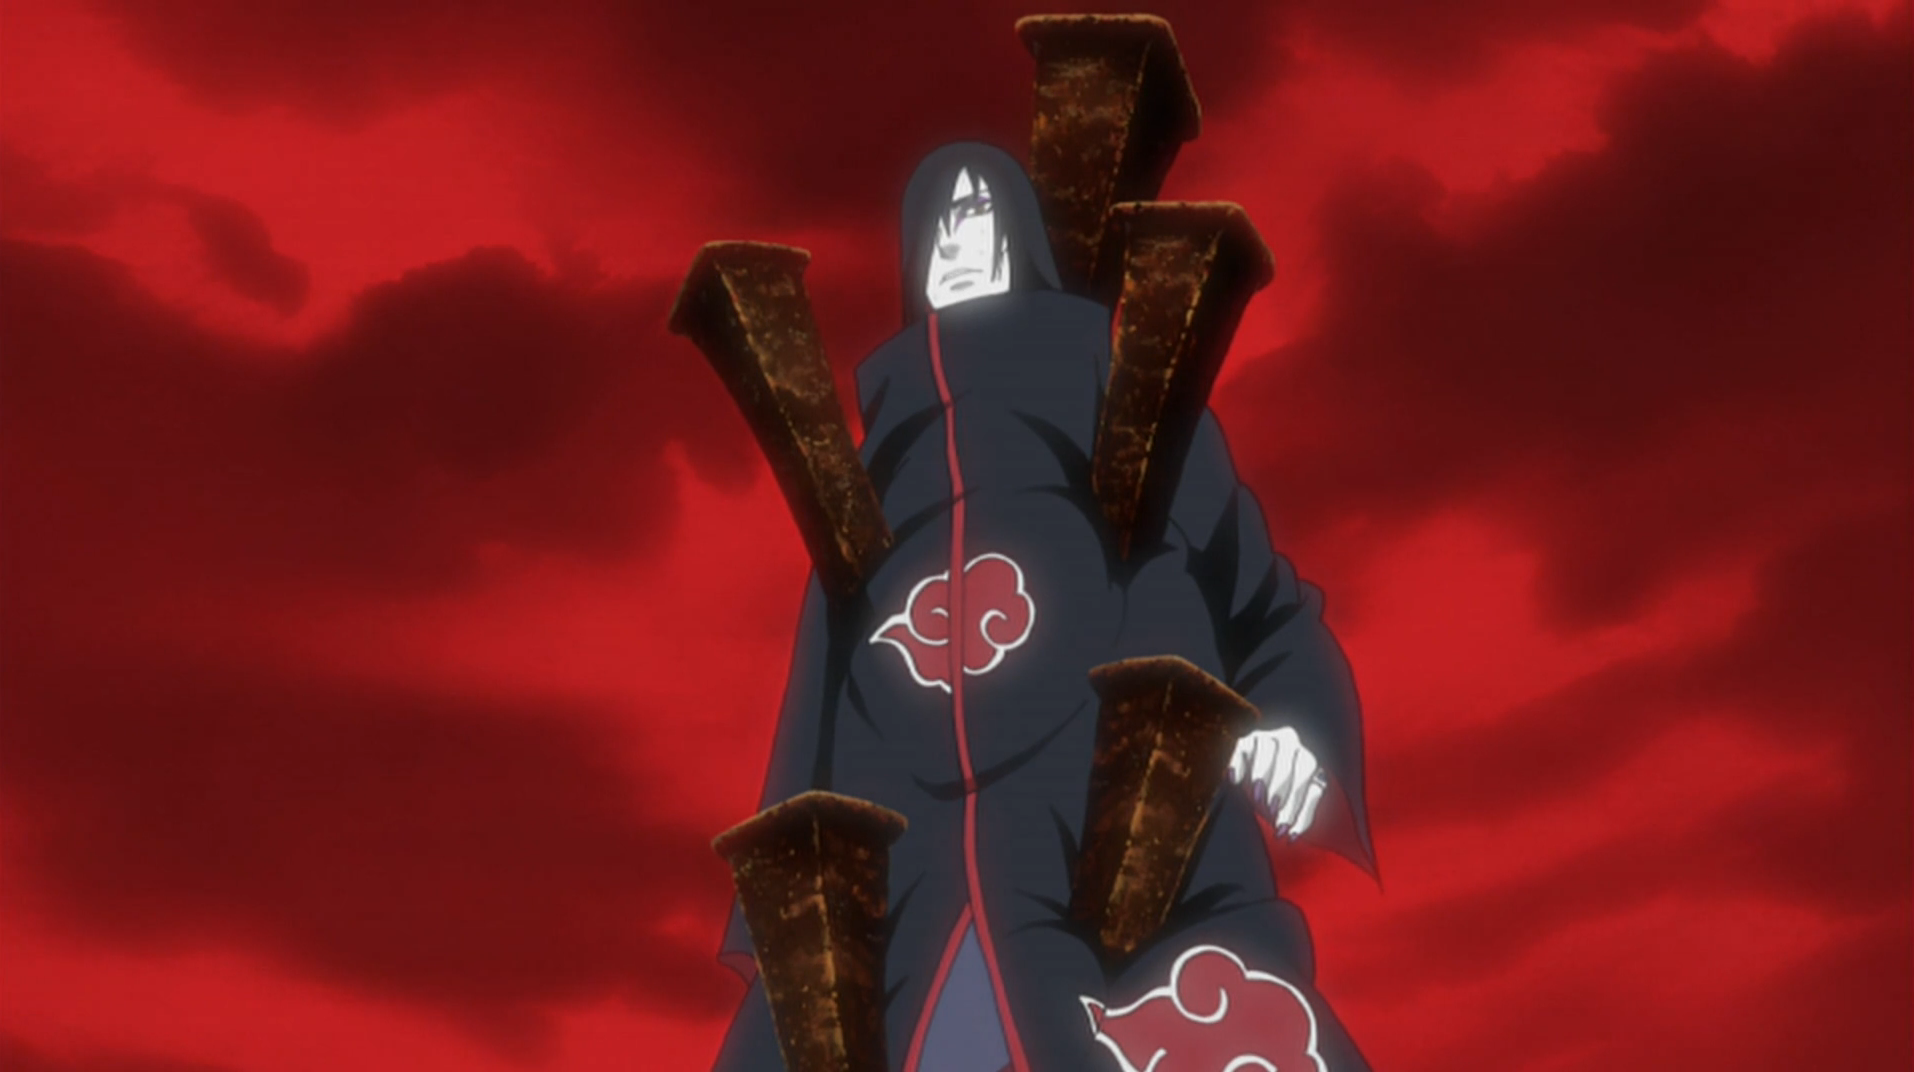 https://vignette.wikia.nocookie.net/naruto/images/d/dd/Orochimaru_Caught_In_The_Shackling_Stakes.PNG/revision/latest?cb=20150328033912